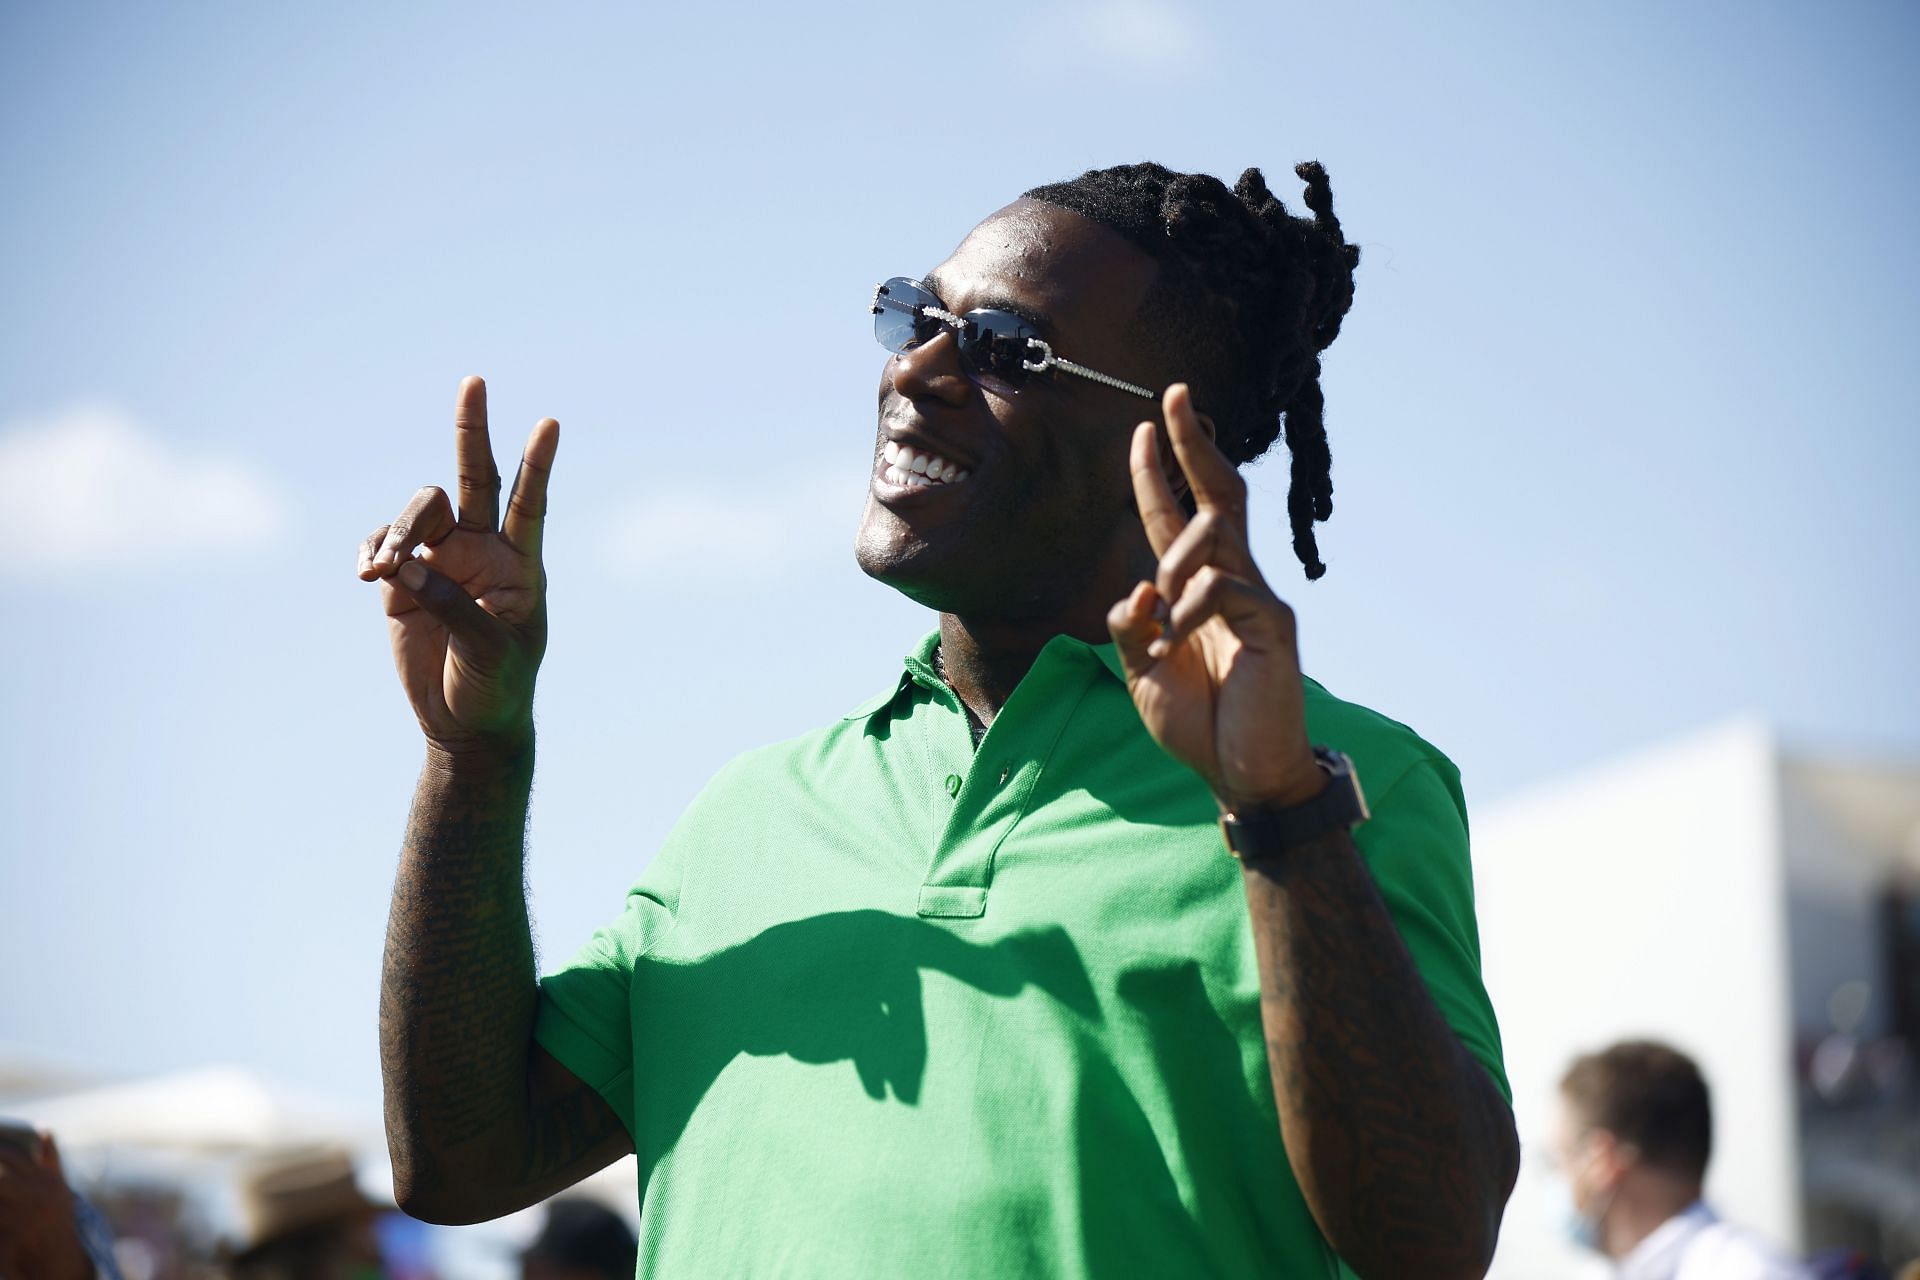 Burna Boy will participate in the halftime show (Image via Getty Images)